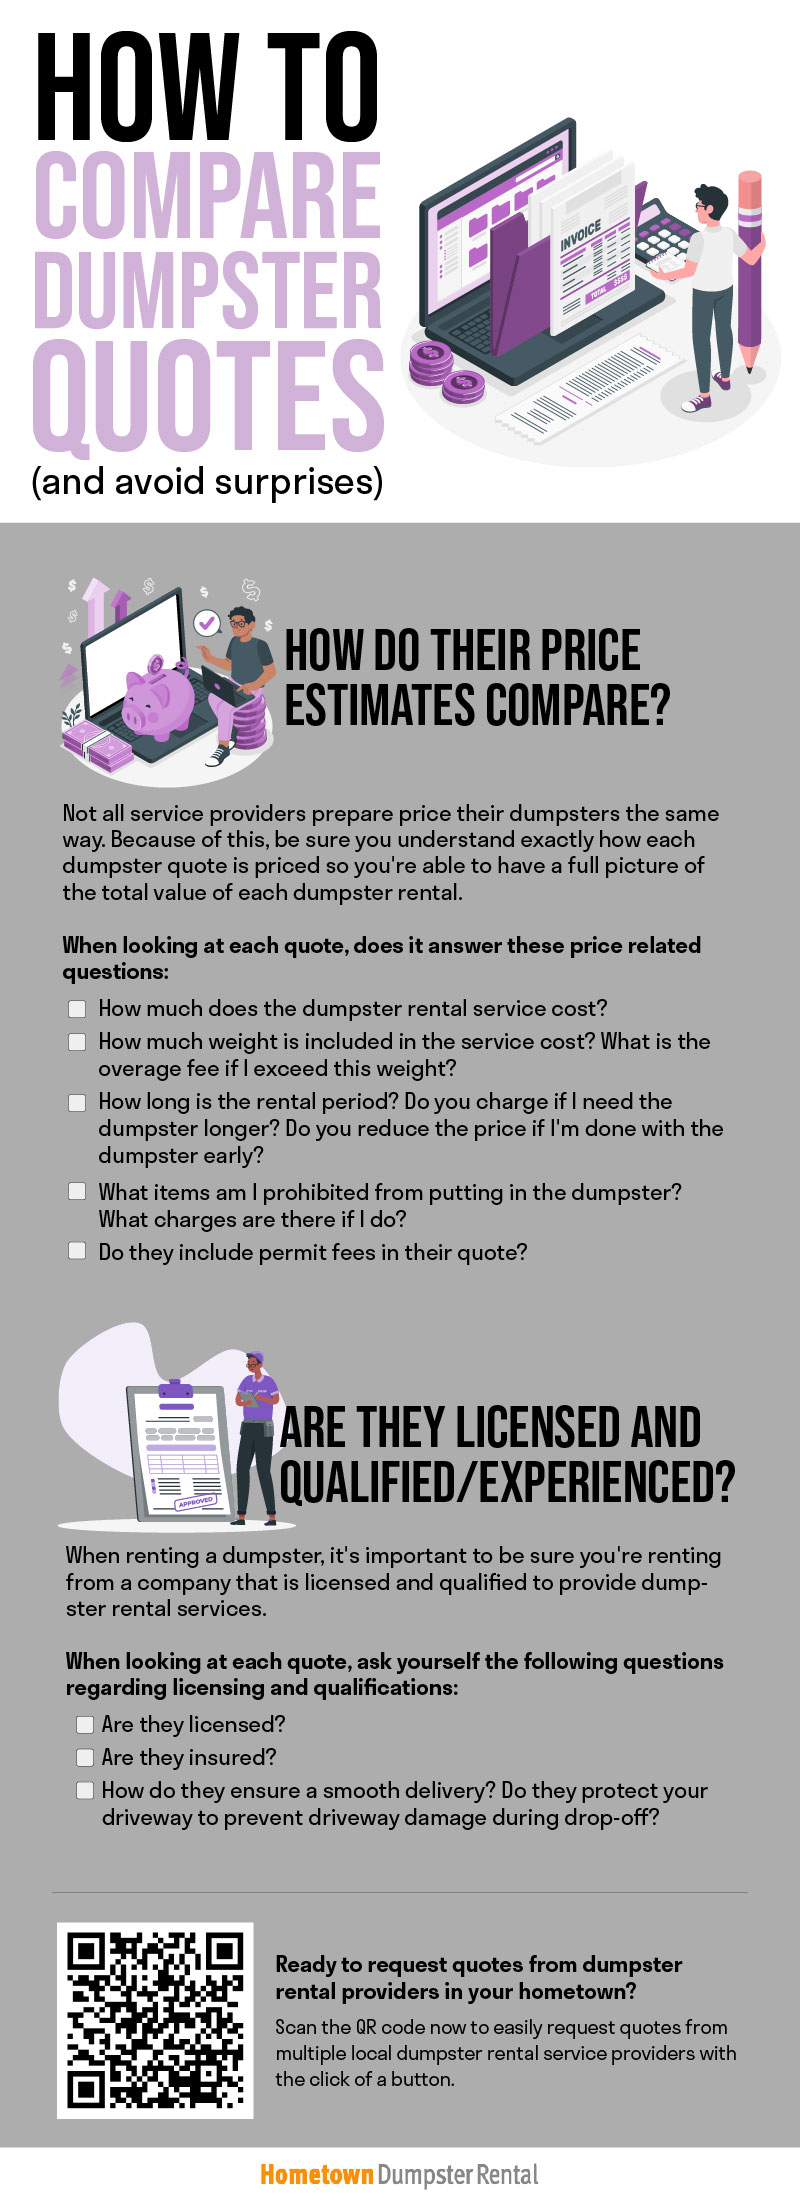 how to compare dumpster rental quotes infographic